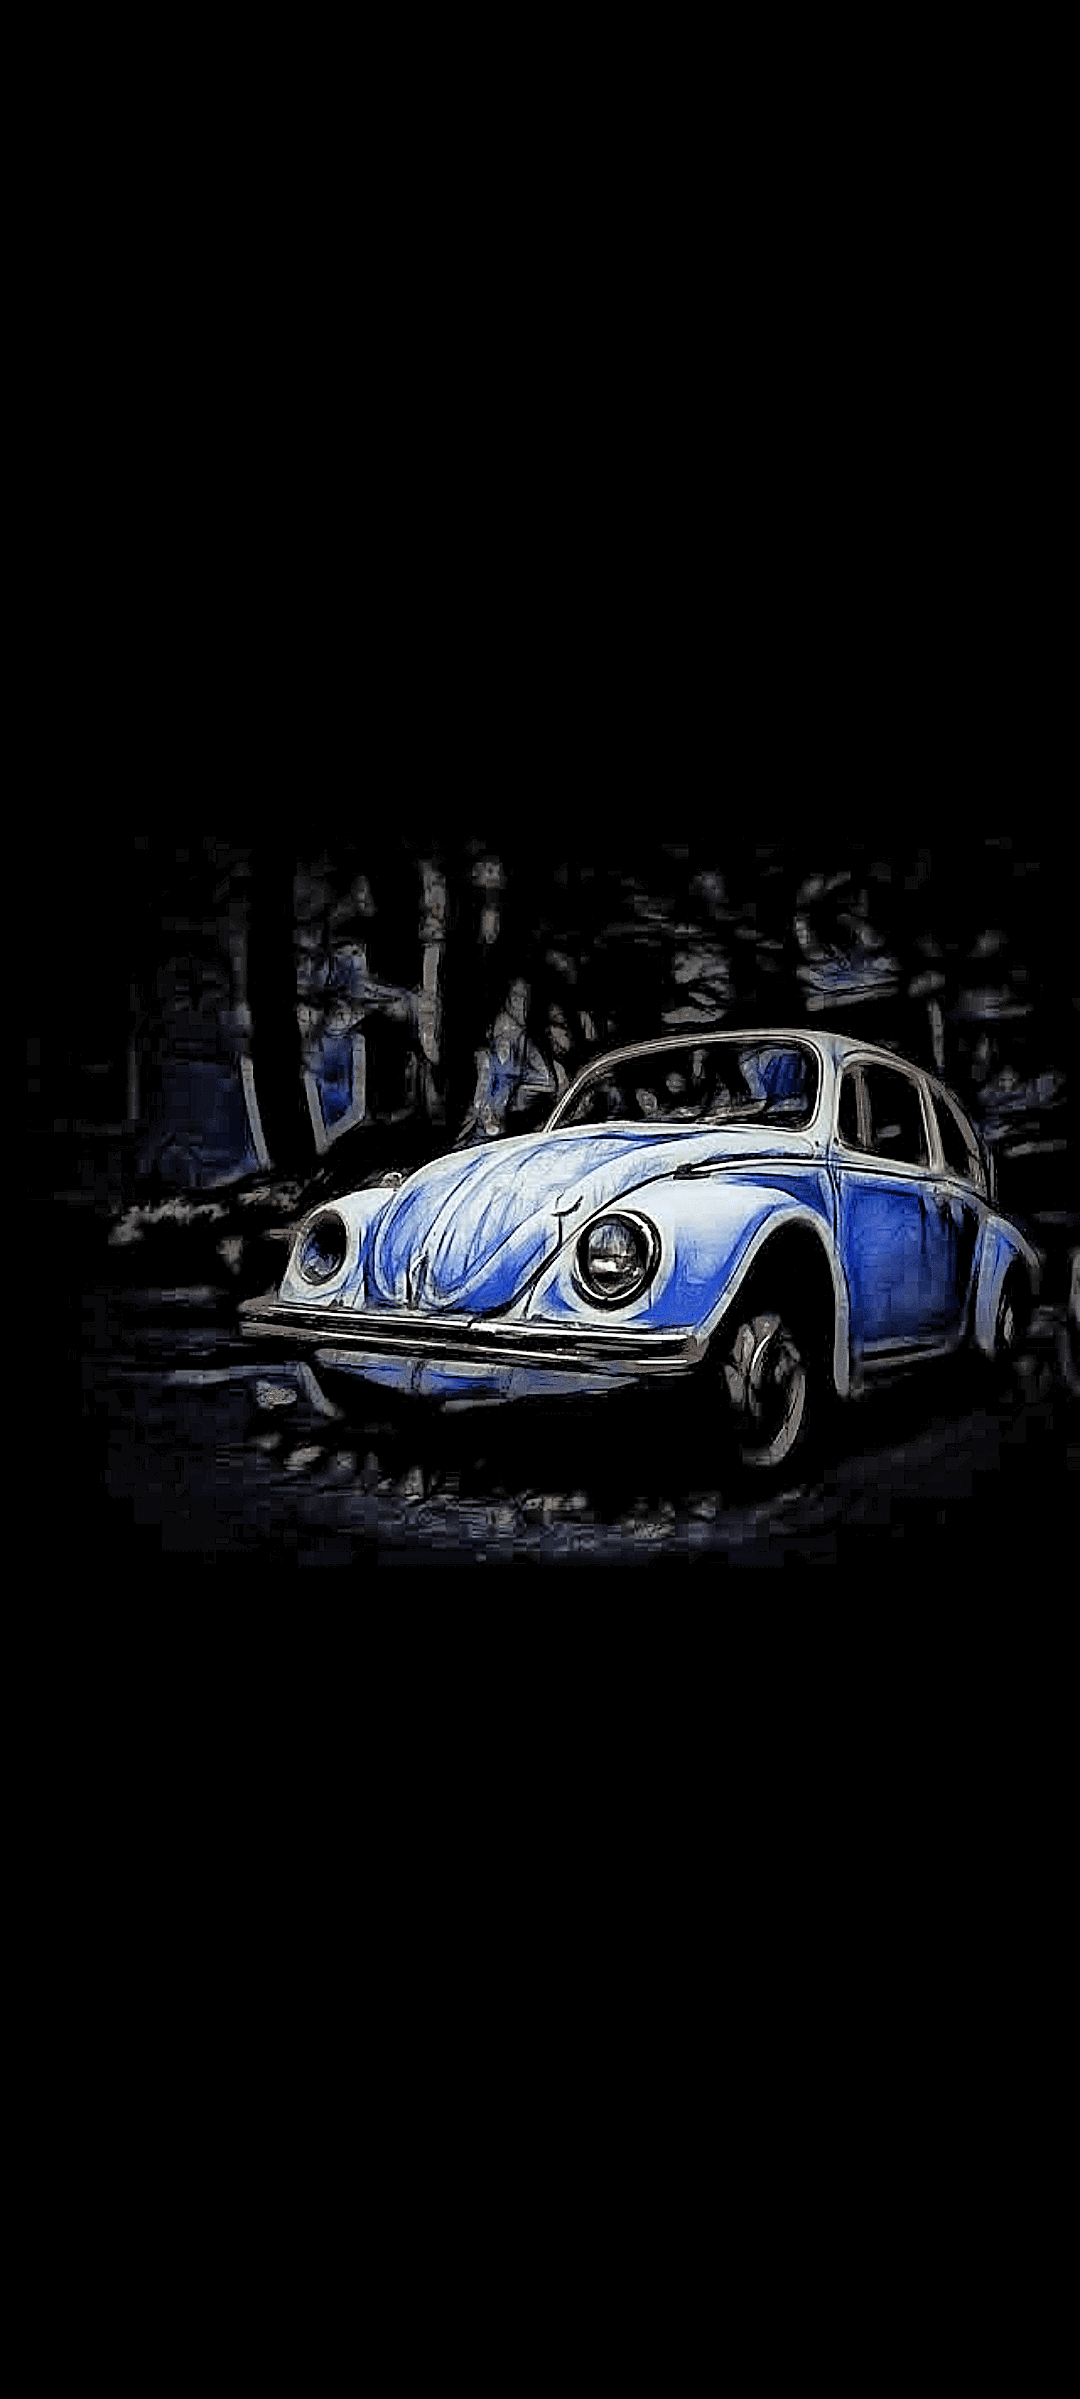 Vw Beetle I Ll Be Making Some More Wallpaper Of